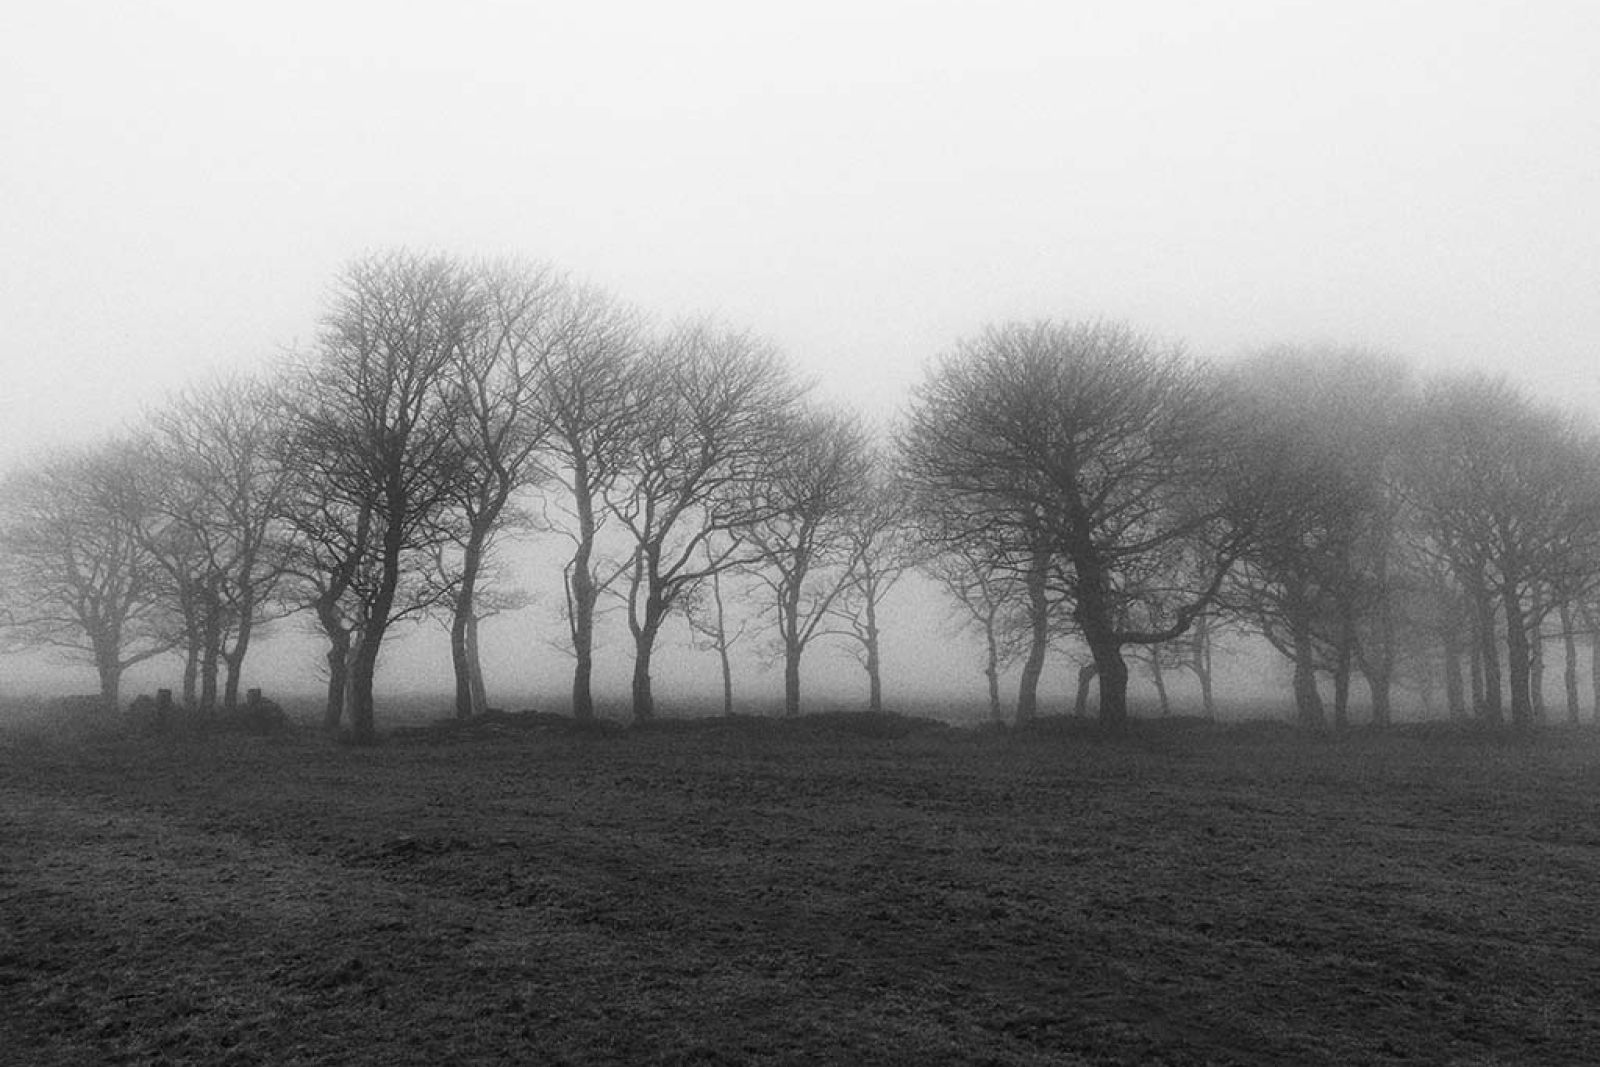 Remains of Brown Wardle Farm in the fog